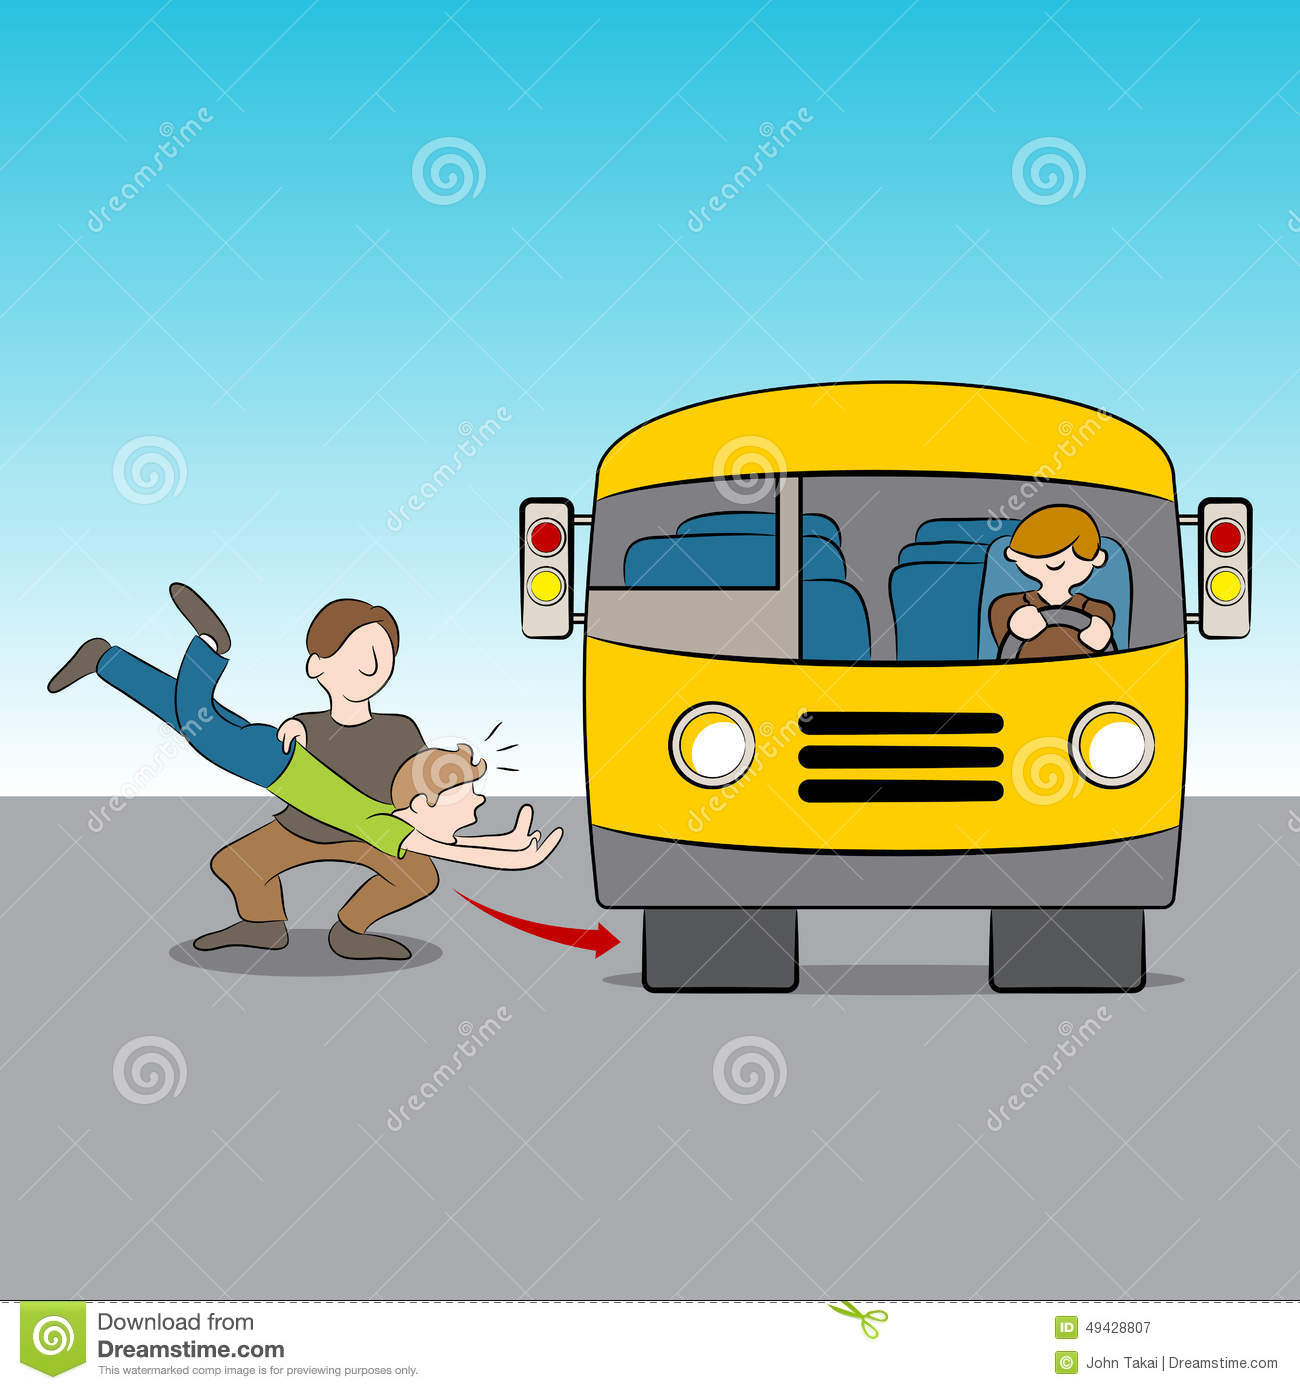 An Image Of The Metaphor Of Being Thrown Under The Bus